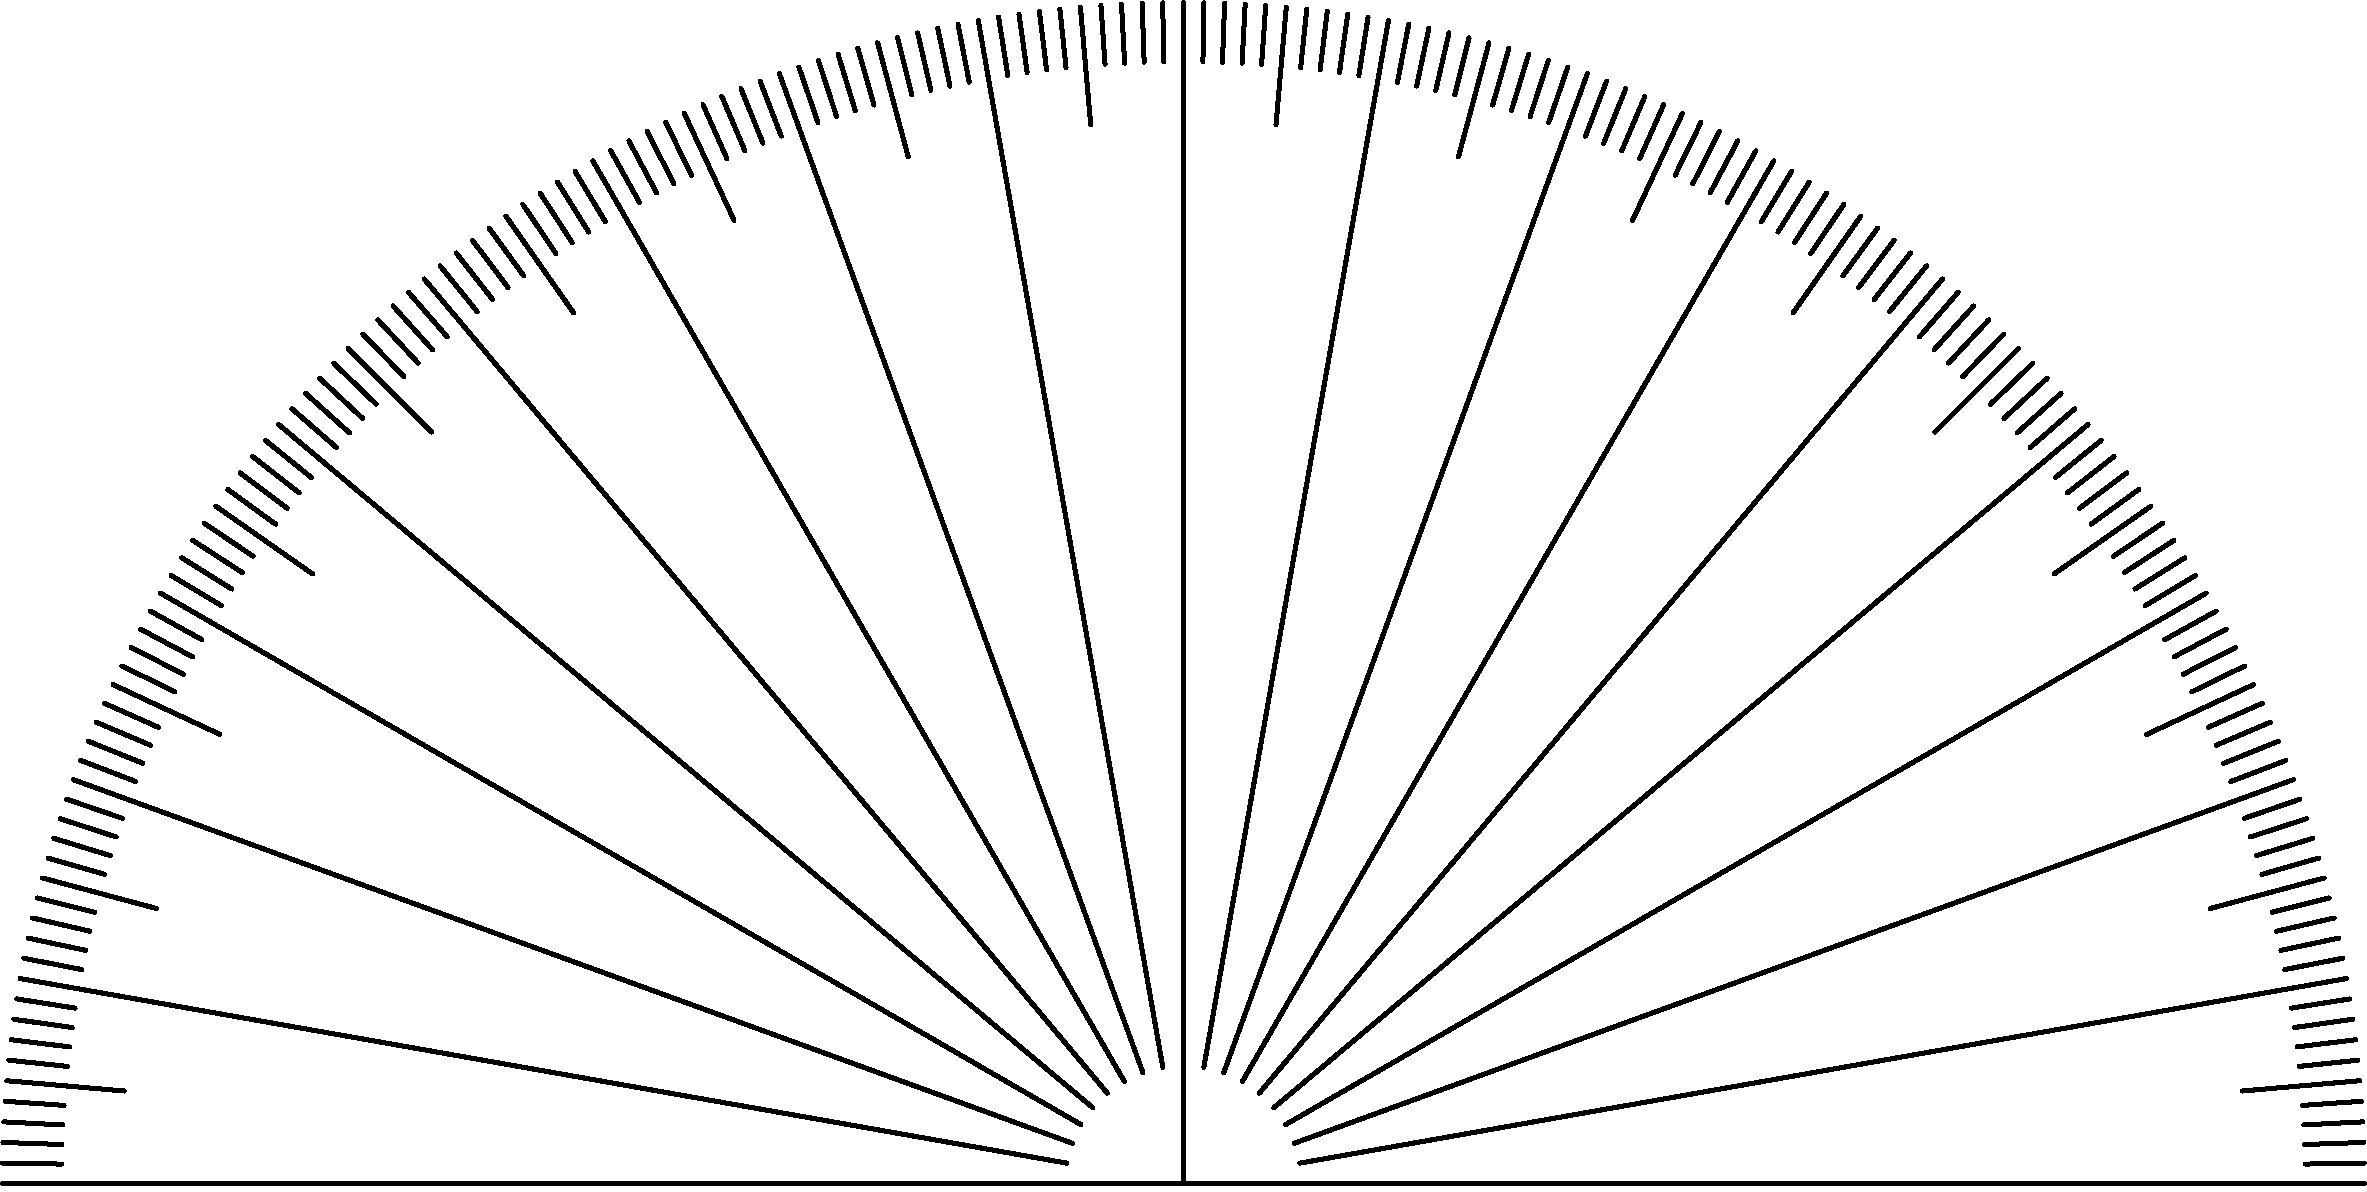 Protractor Print Cut Out | Search Results | Calendar 2015